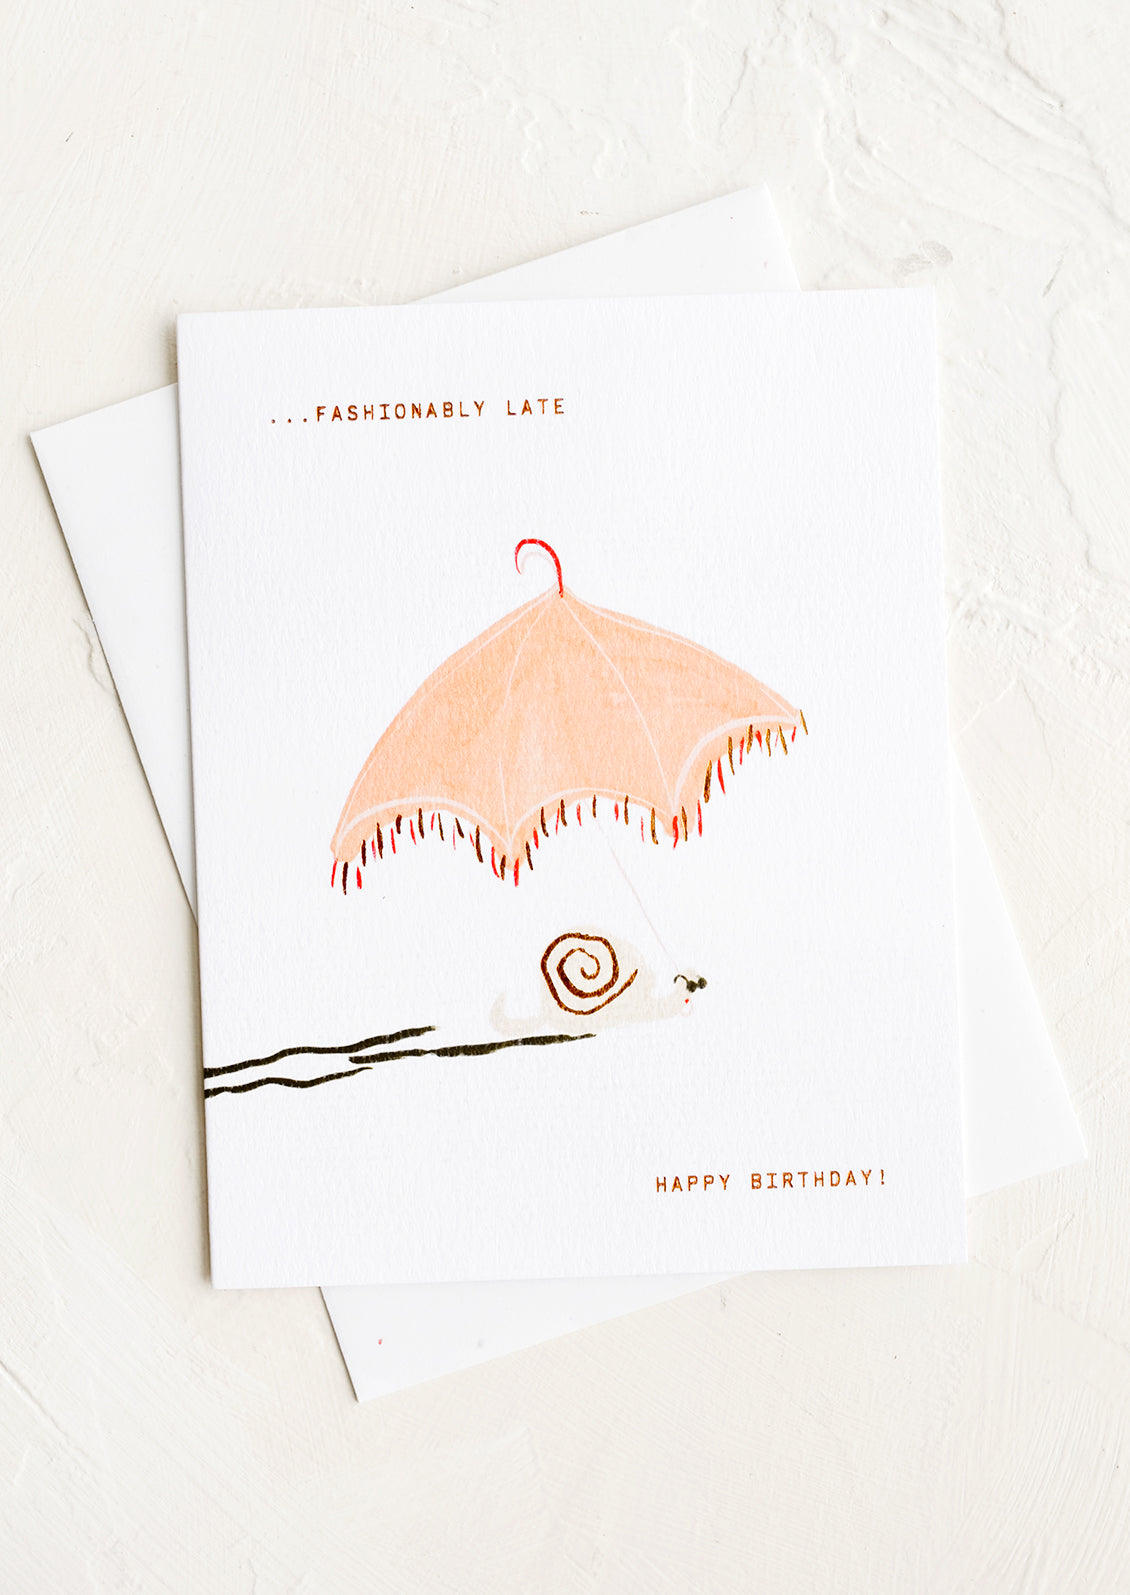 Funny Birthday Card - Fashionably Late from